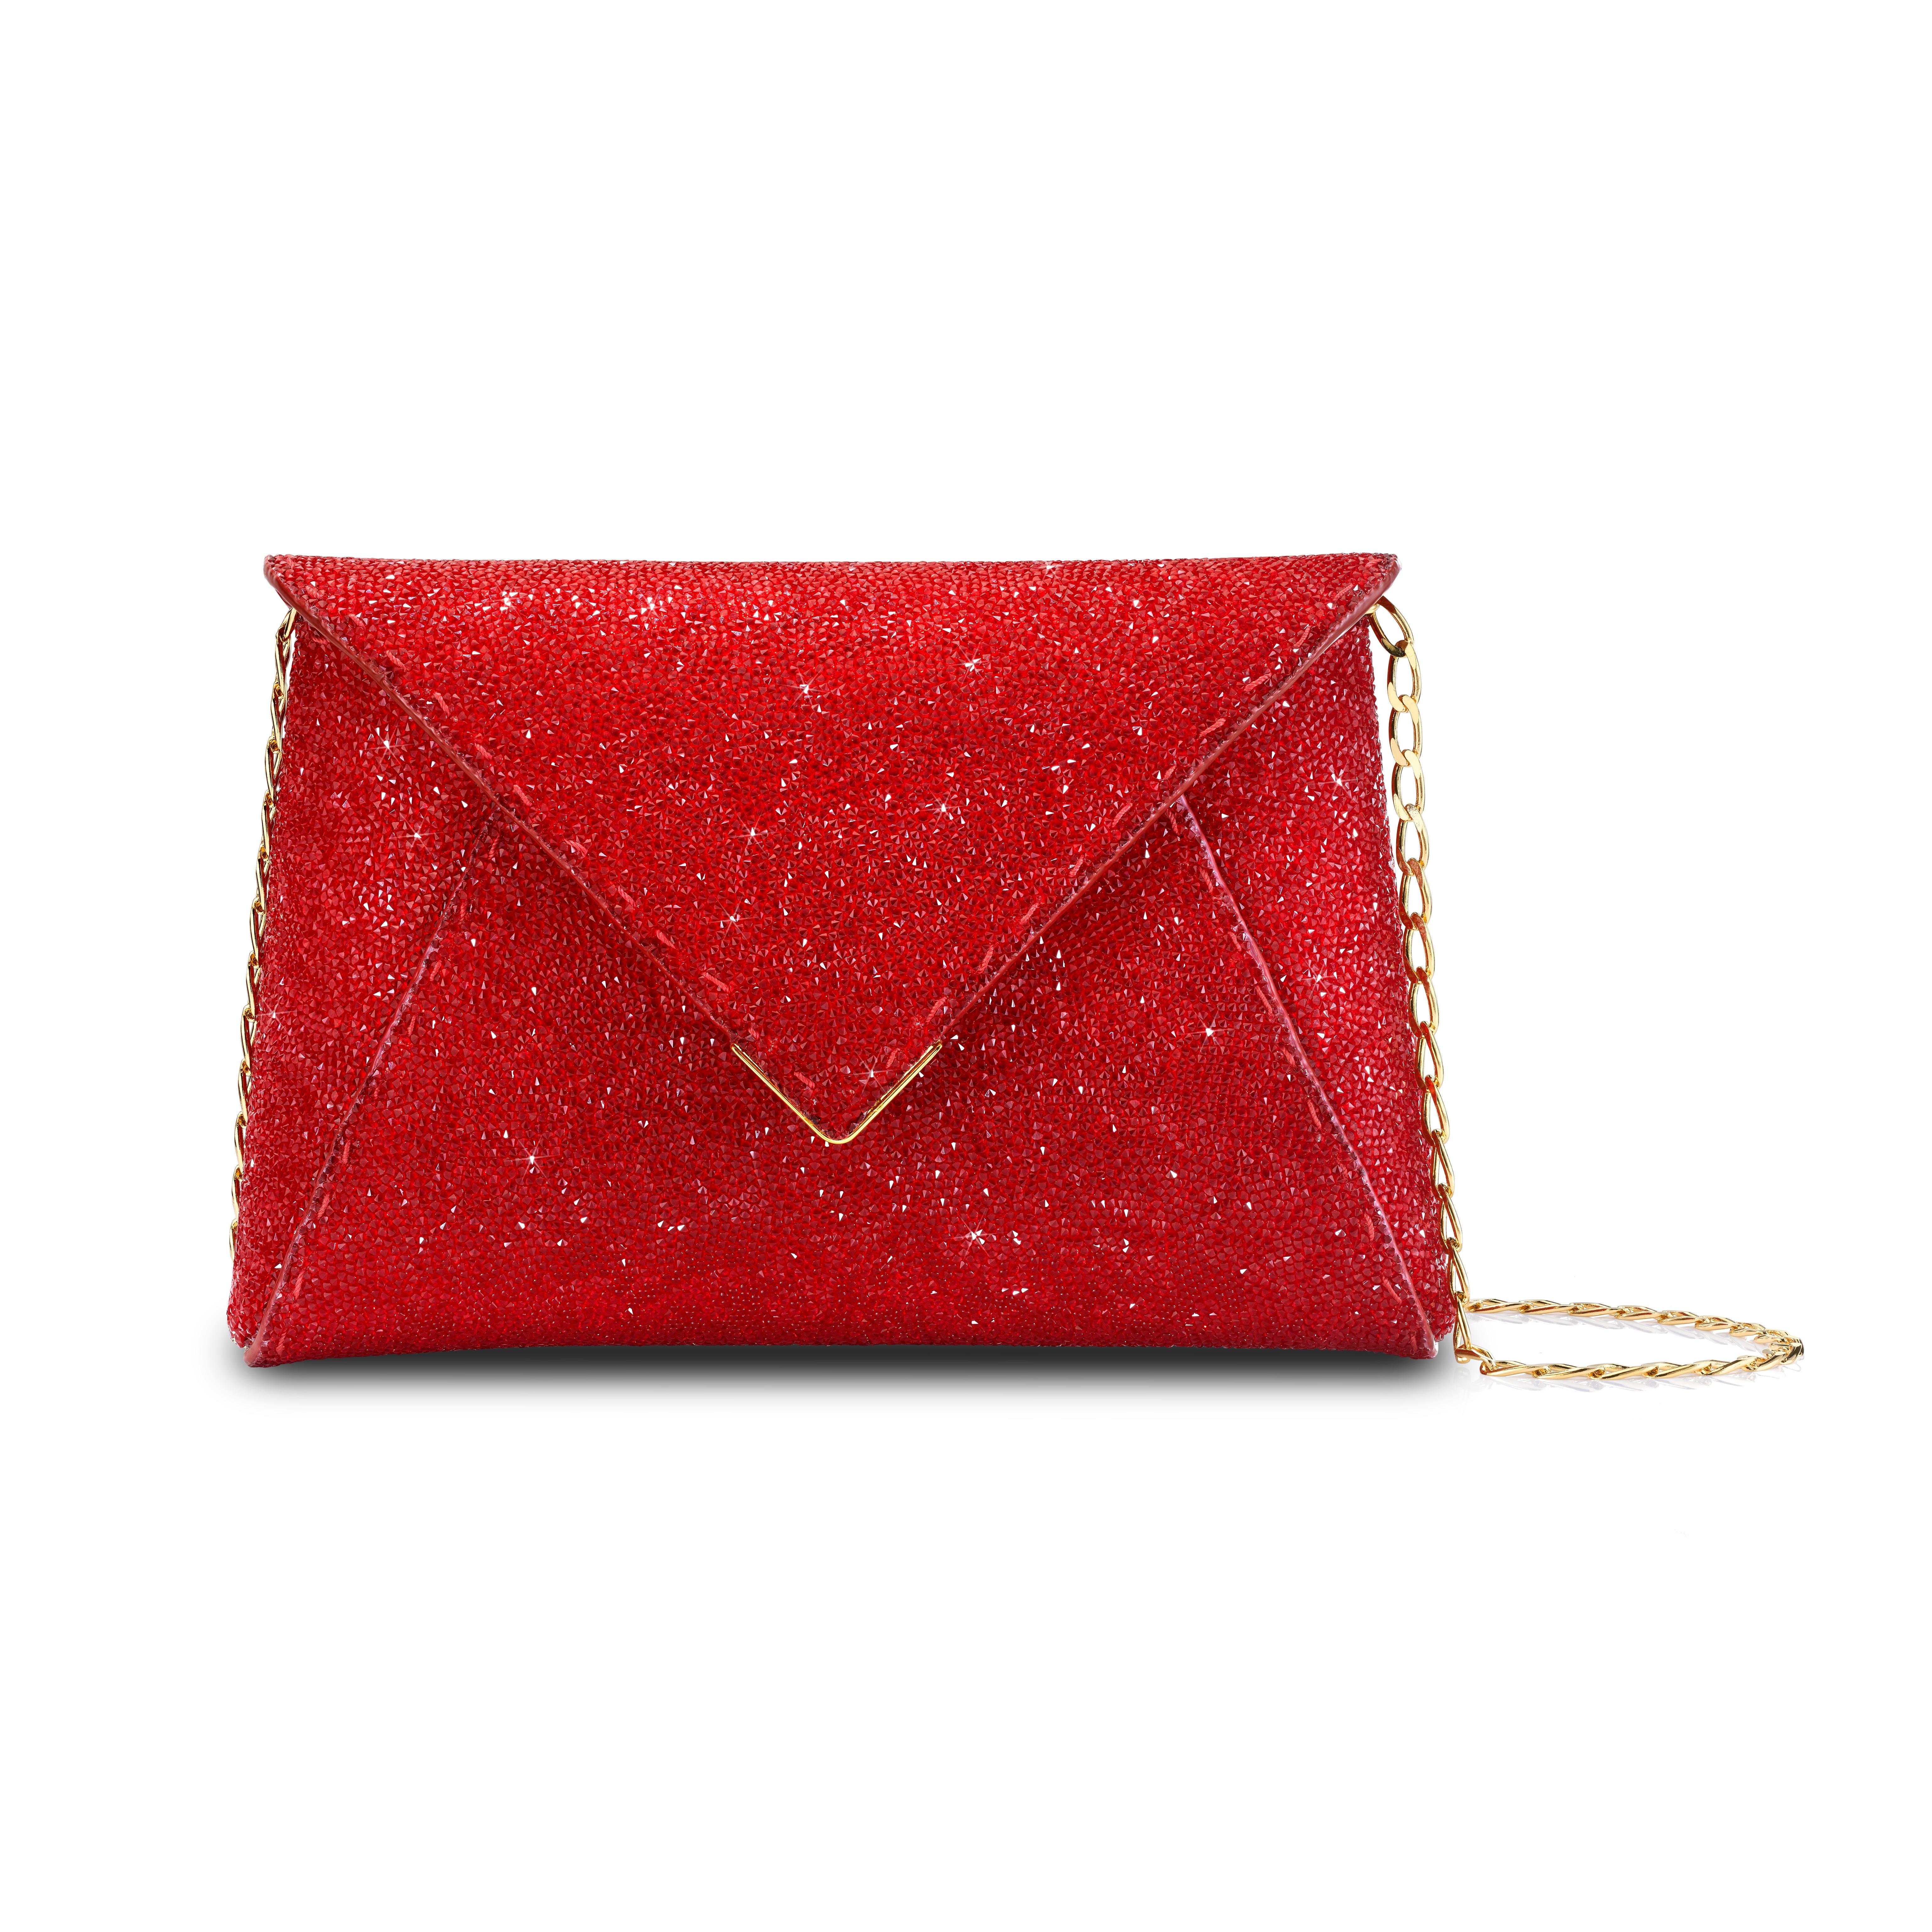 The Lee Pouchet Small Clutch is featured in our Scarlet Red Swarovski rock crystal and gold hardware. The envelope-shaped clutch has a triangular front flap and a magnetic snap closure. The exterior detailing is entirely hand-stitched. The bag is